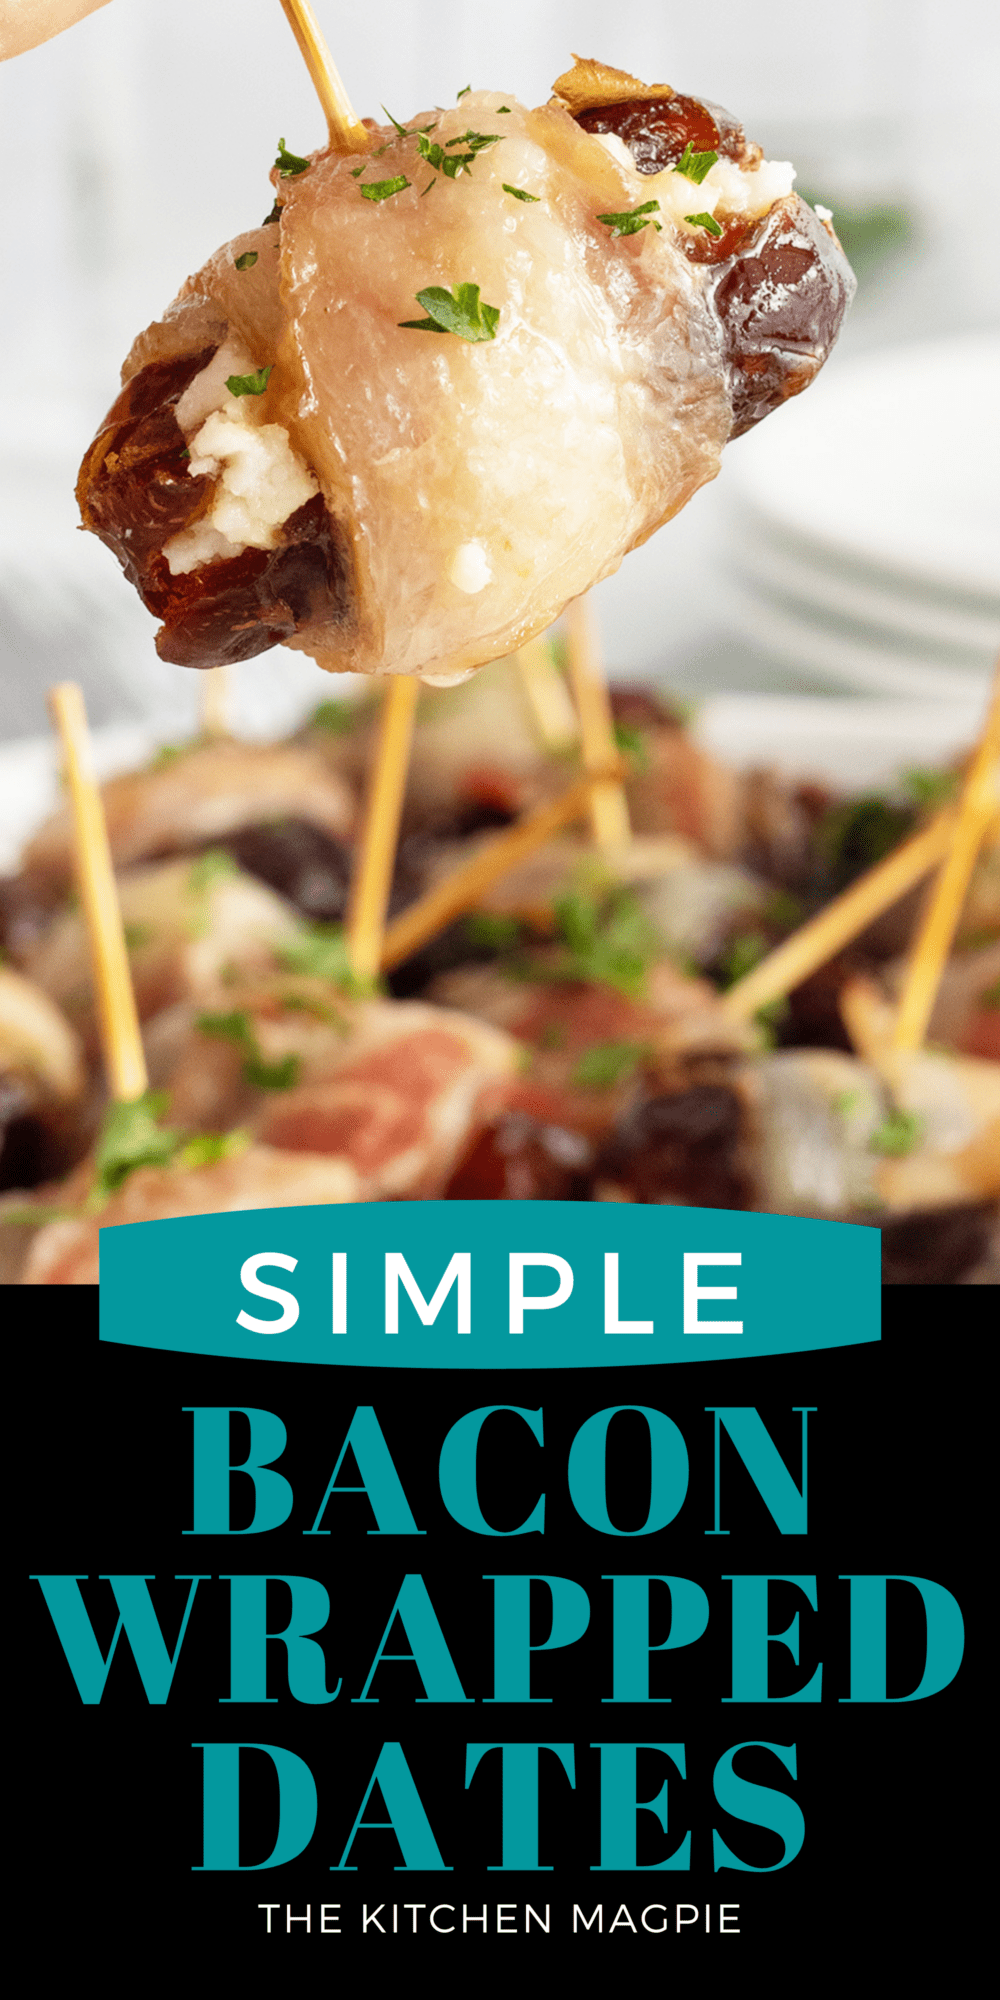 This recipe for bacon-wrapped dates with cheese and smoky bacon will not only turn dates into a delicious appetizer, but will be a new favorite.